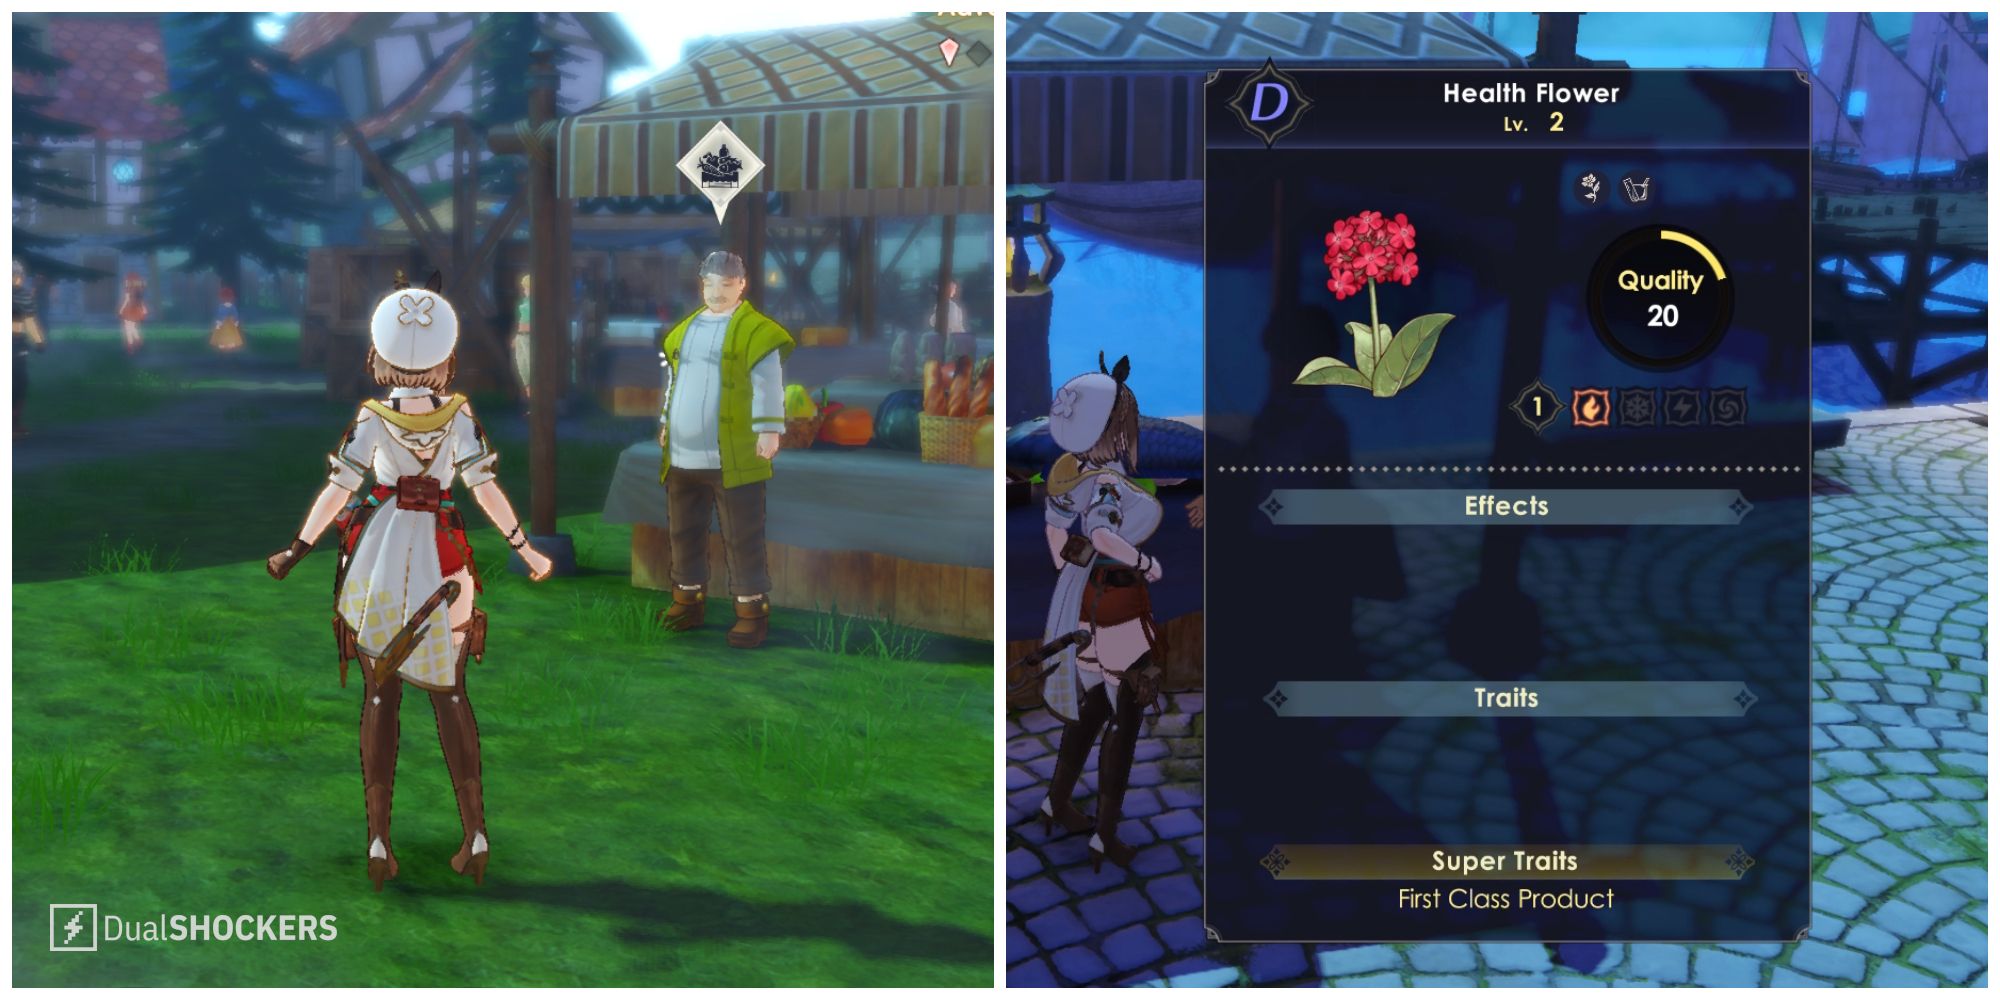 Split image of a shopkeeper and an item for sale in Atelier Ryza 3.